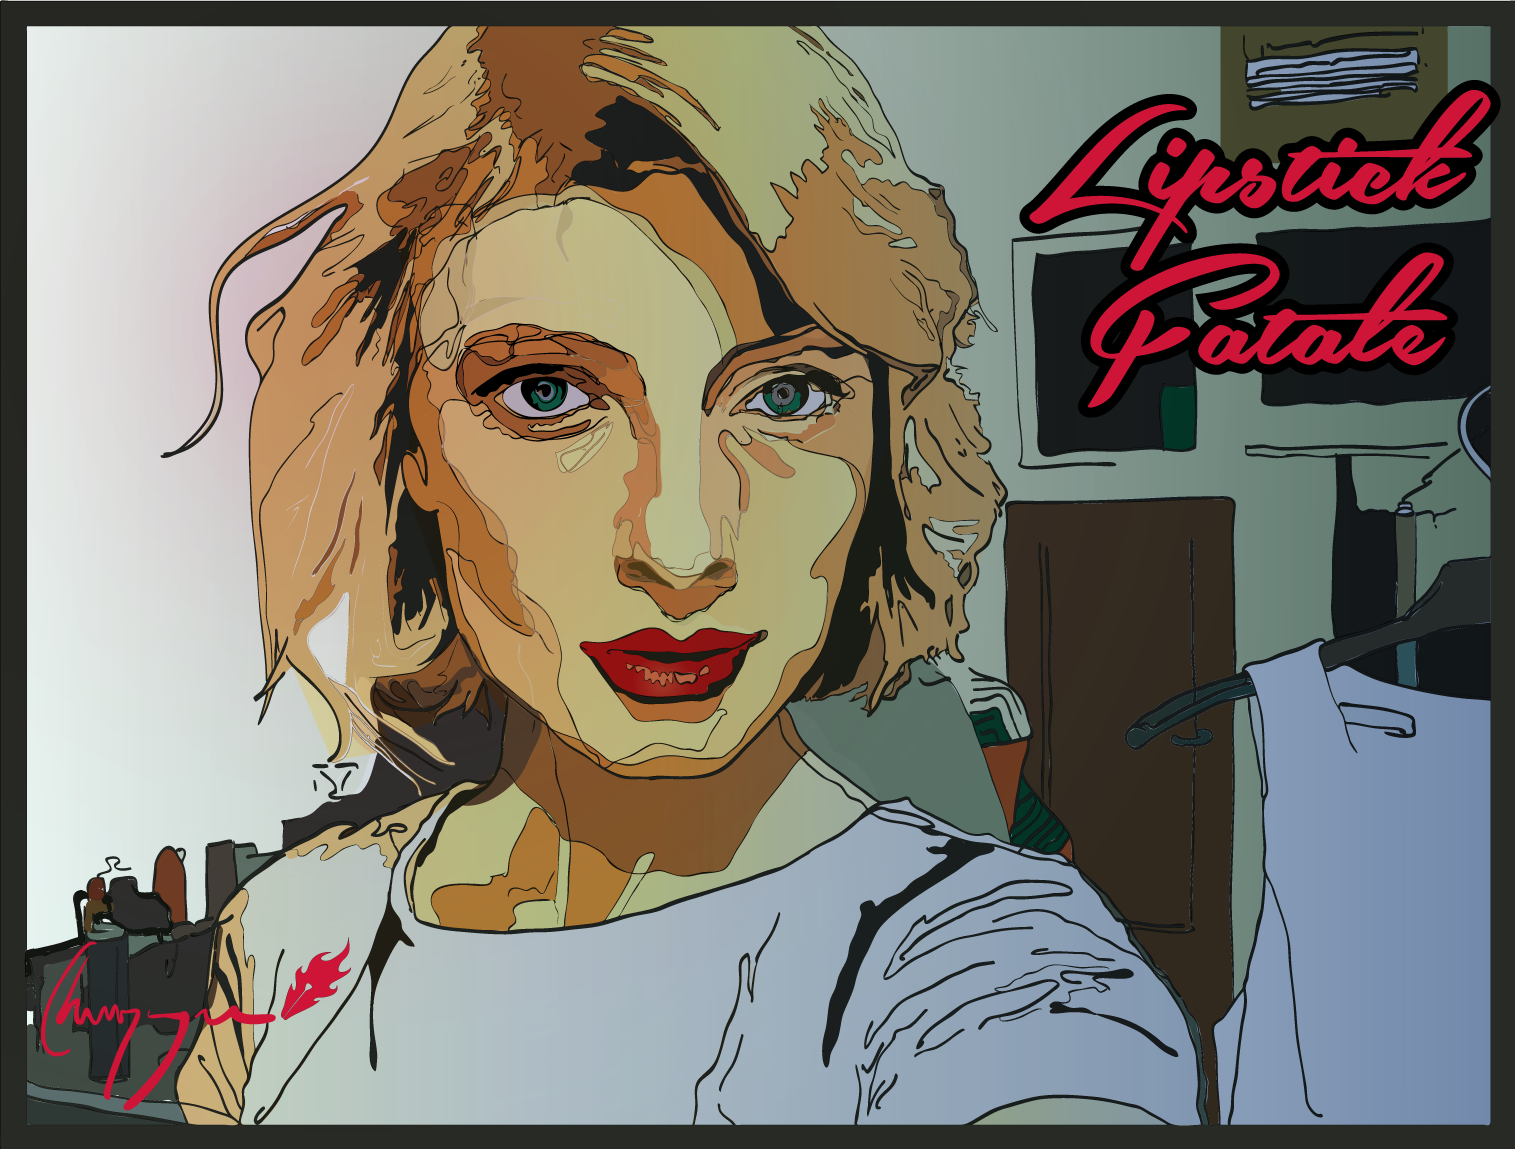 A vector illustration of a lady wearing bright red lipstick